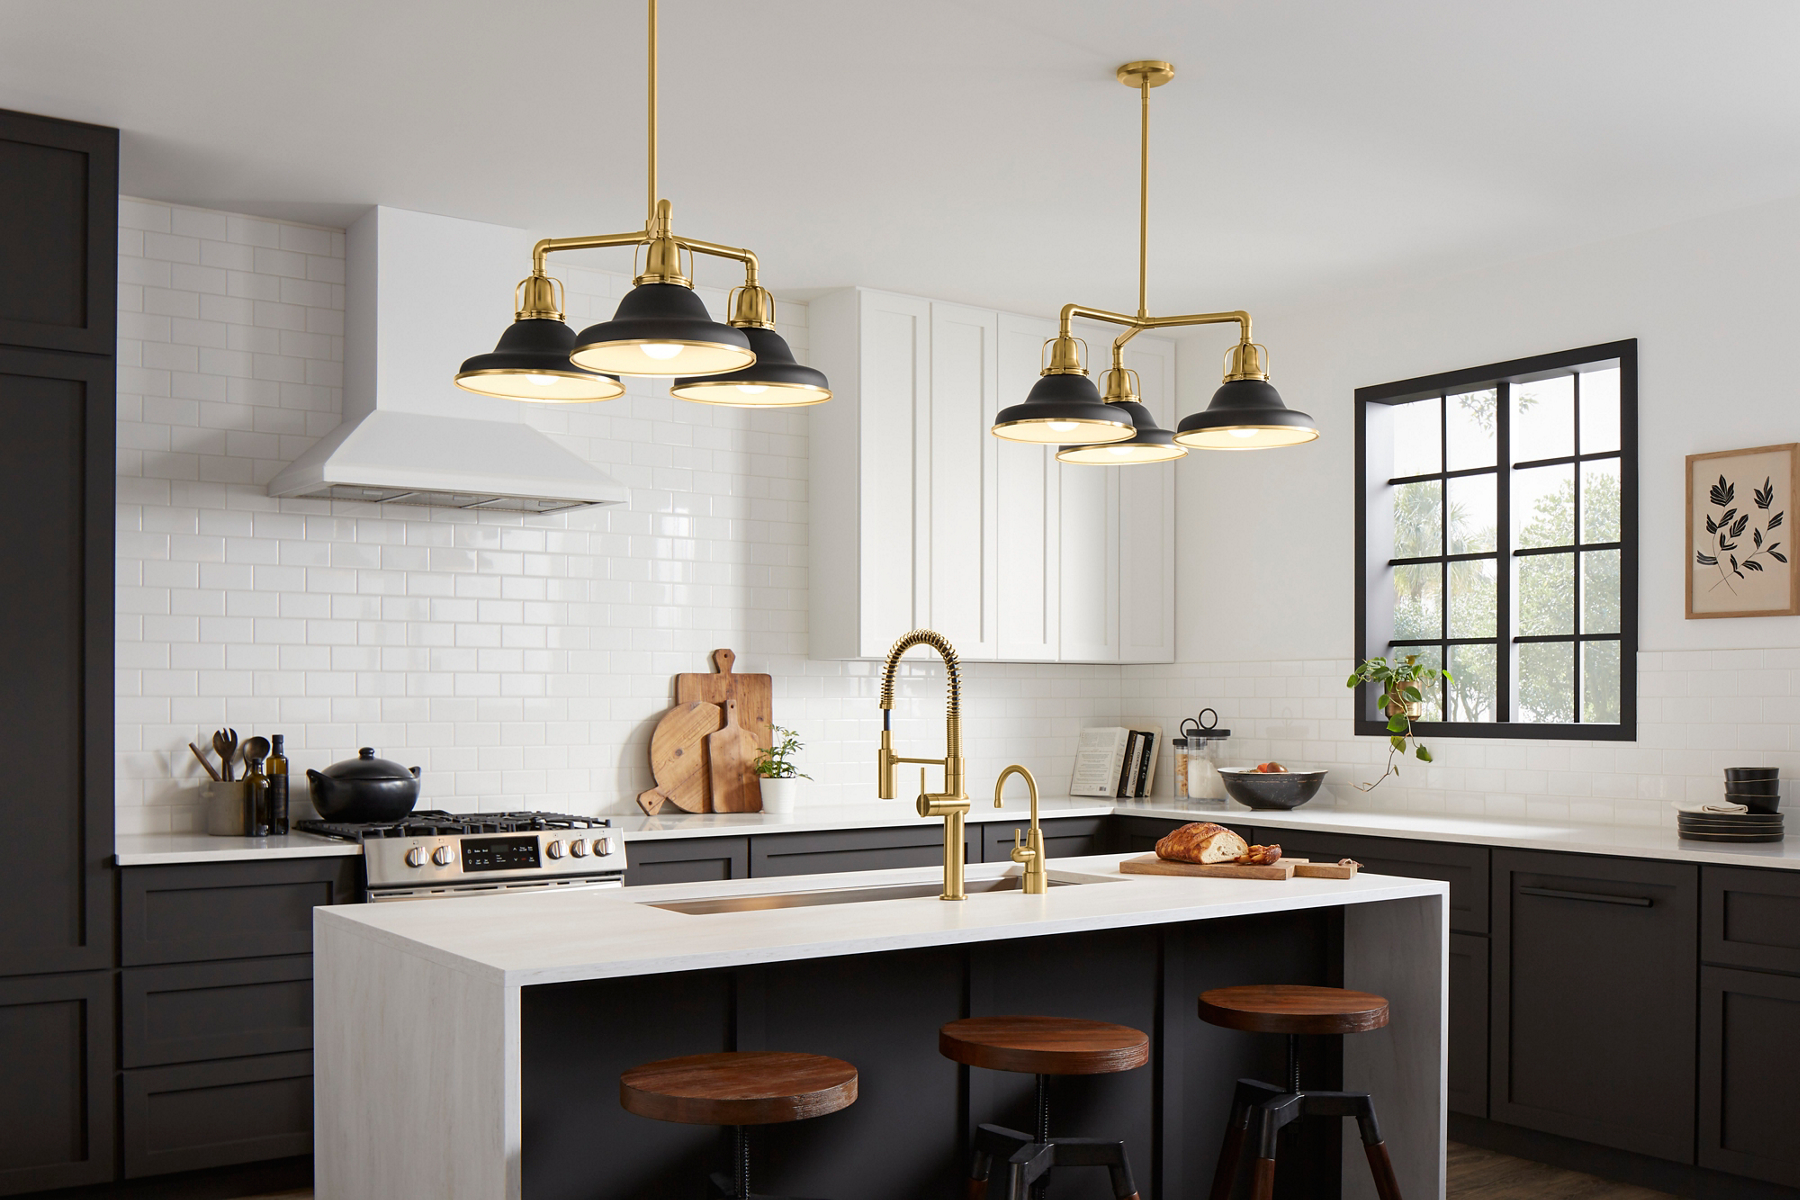 A kitchen in white and deep blue with brushed brass Crue collection faucets.